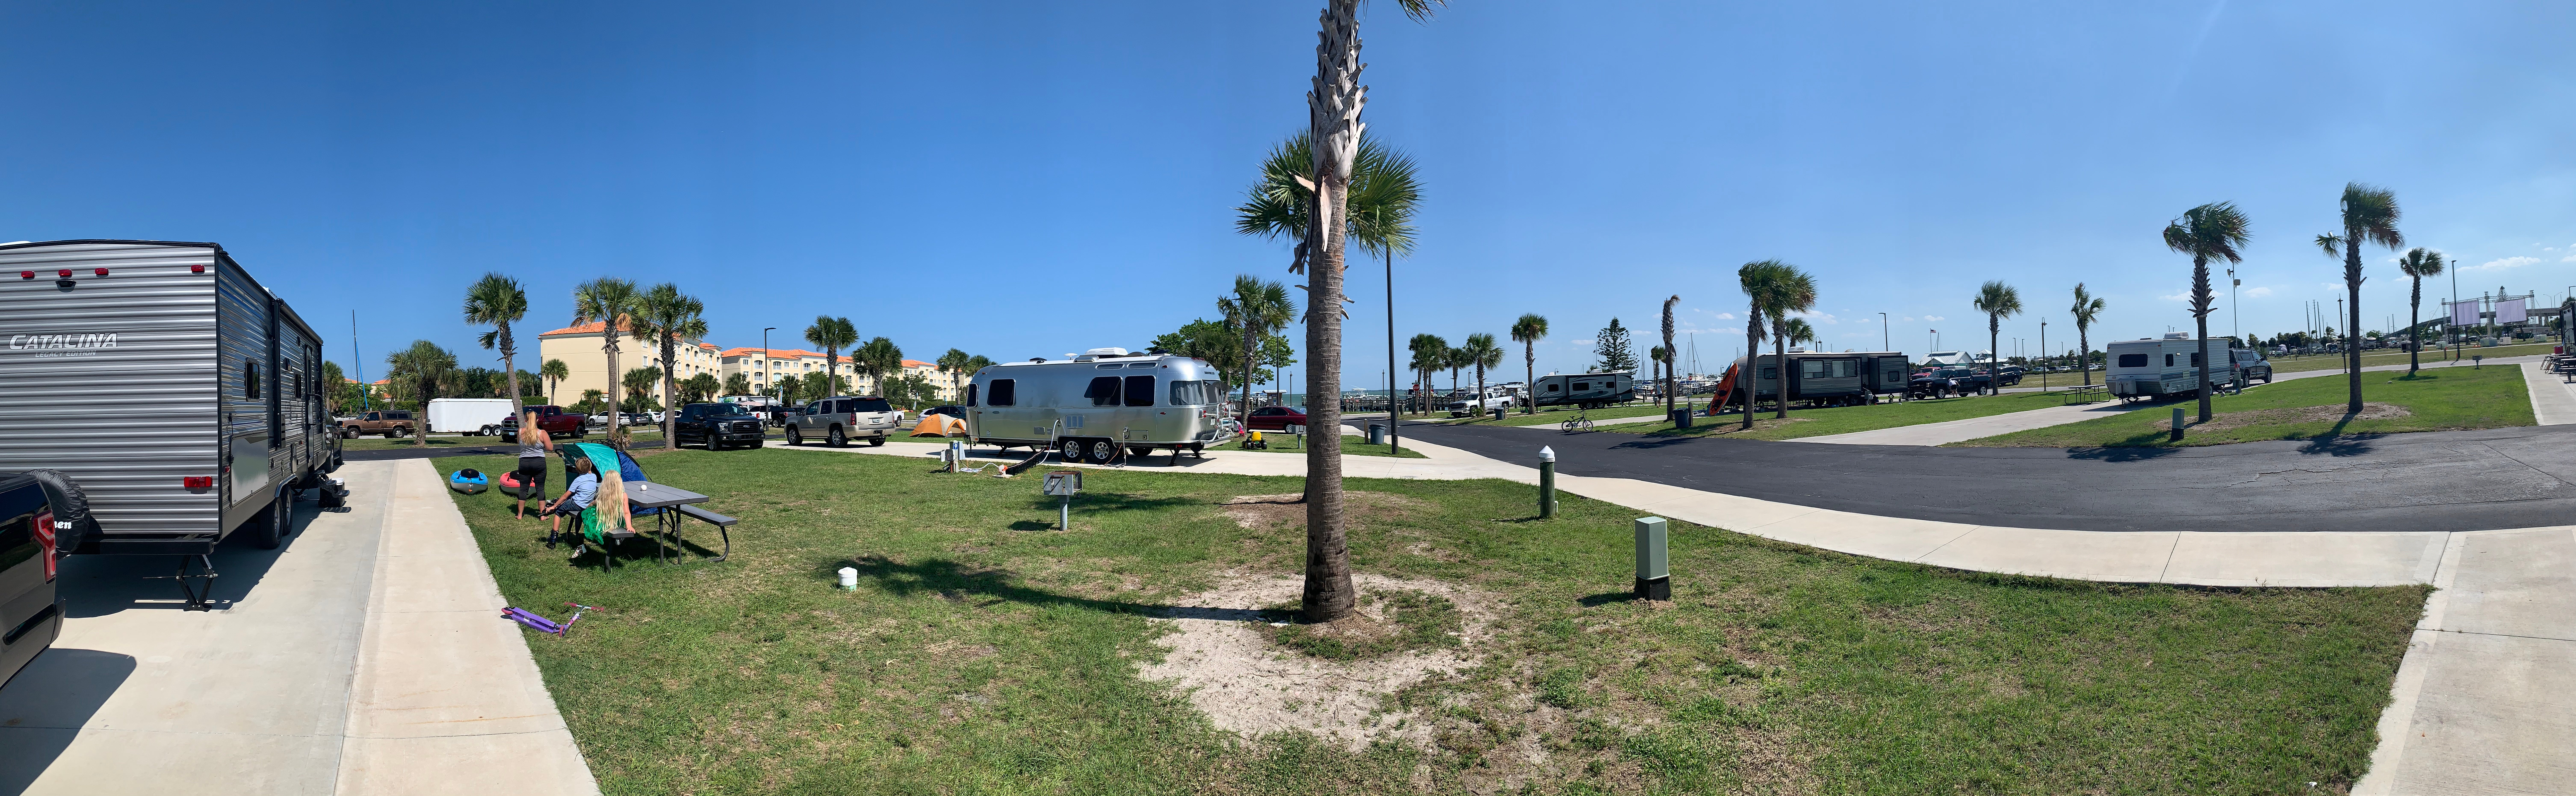 Camper submitted image from Causeway Cove Marina and RV Park - 4